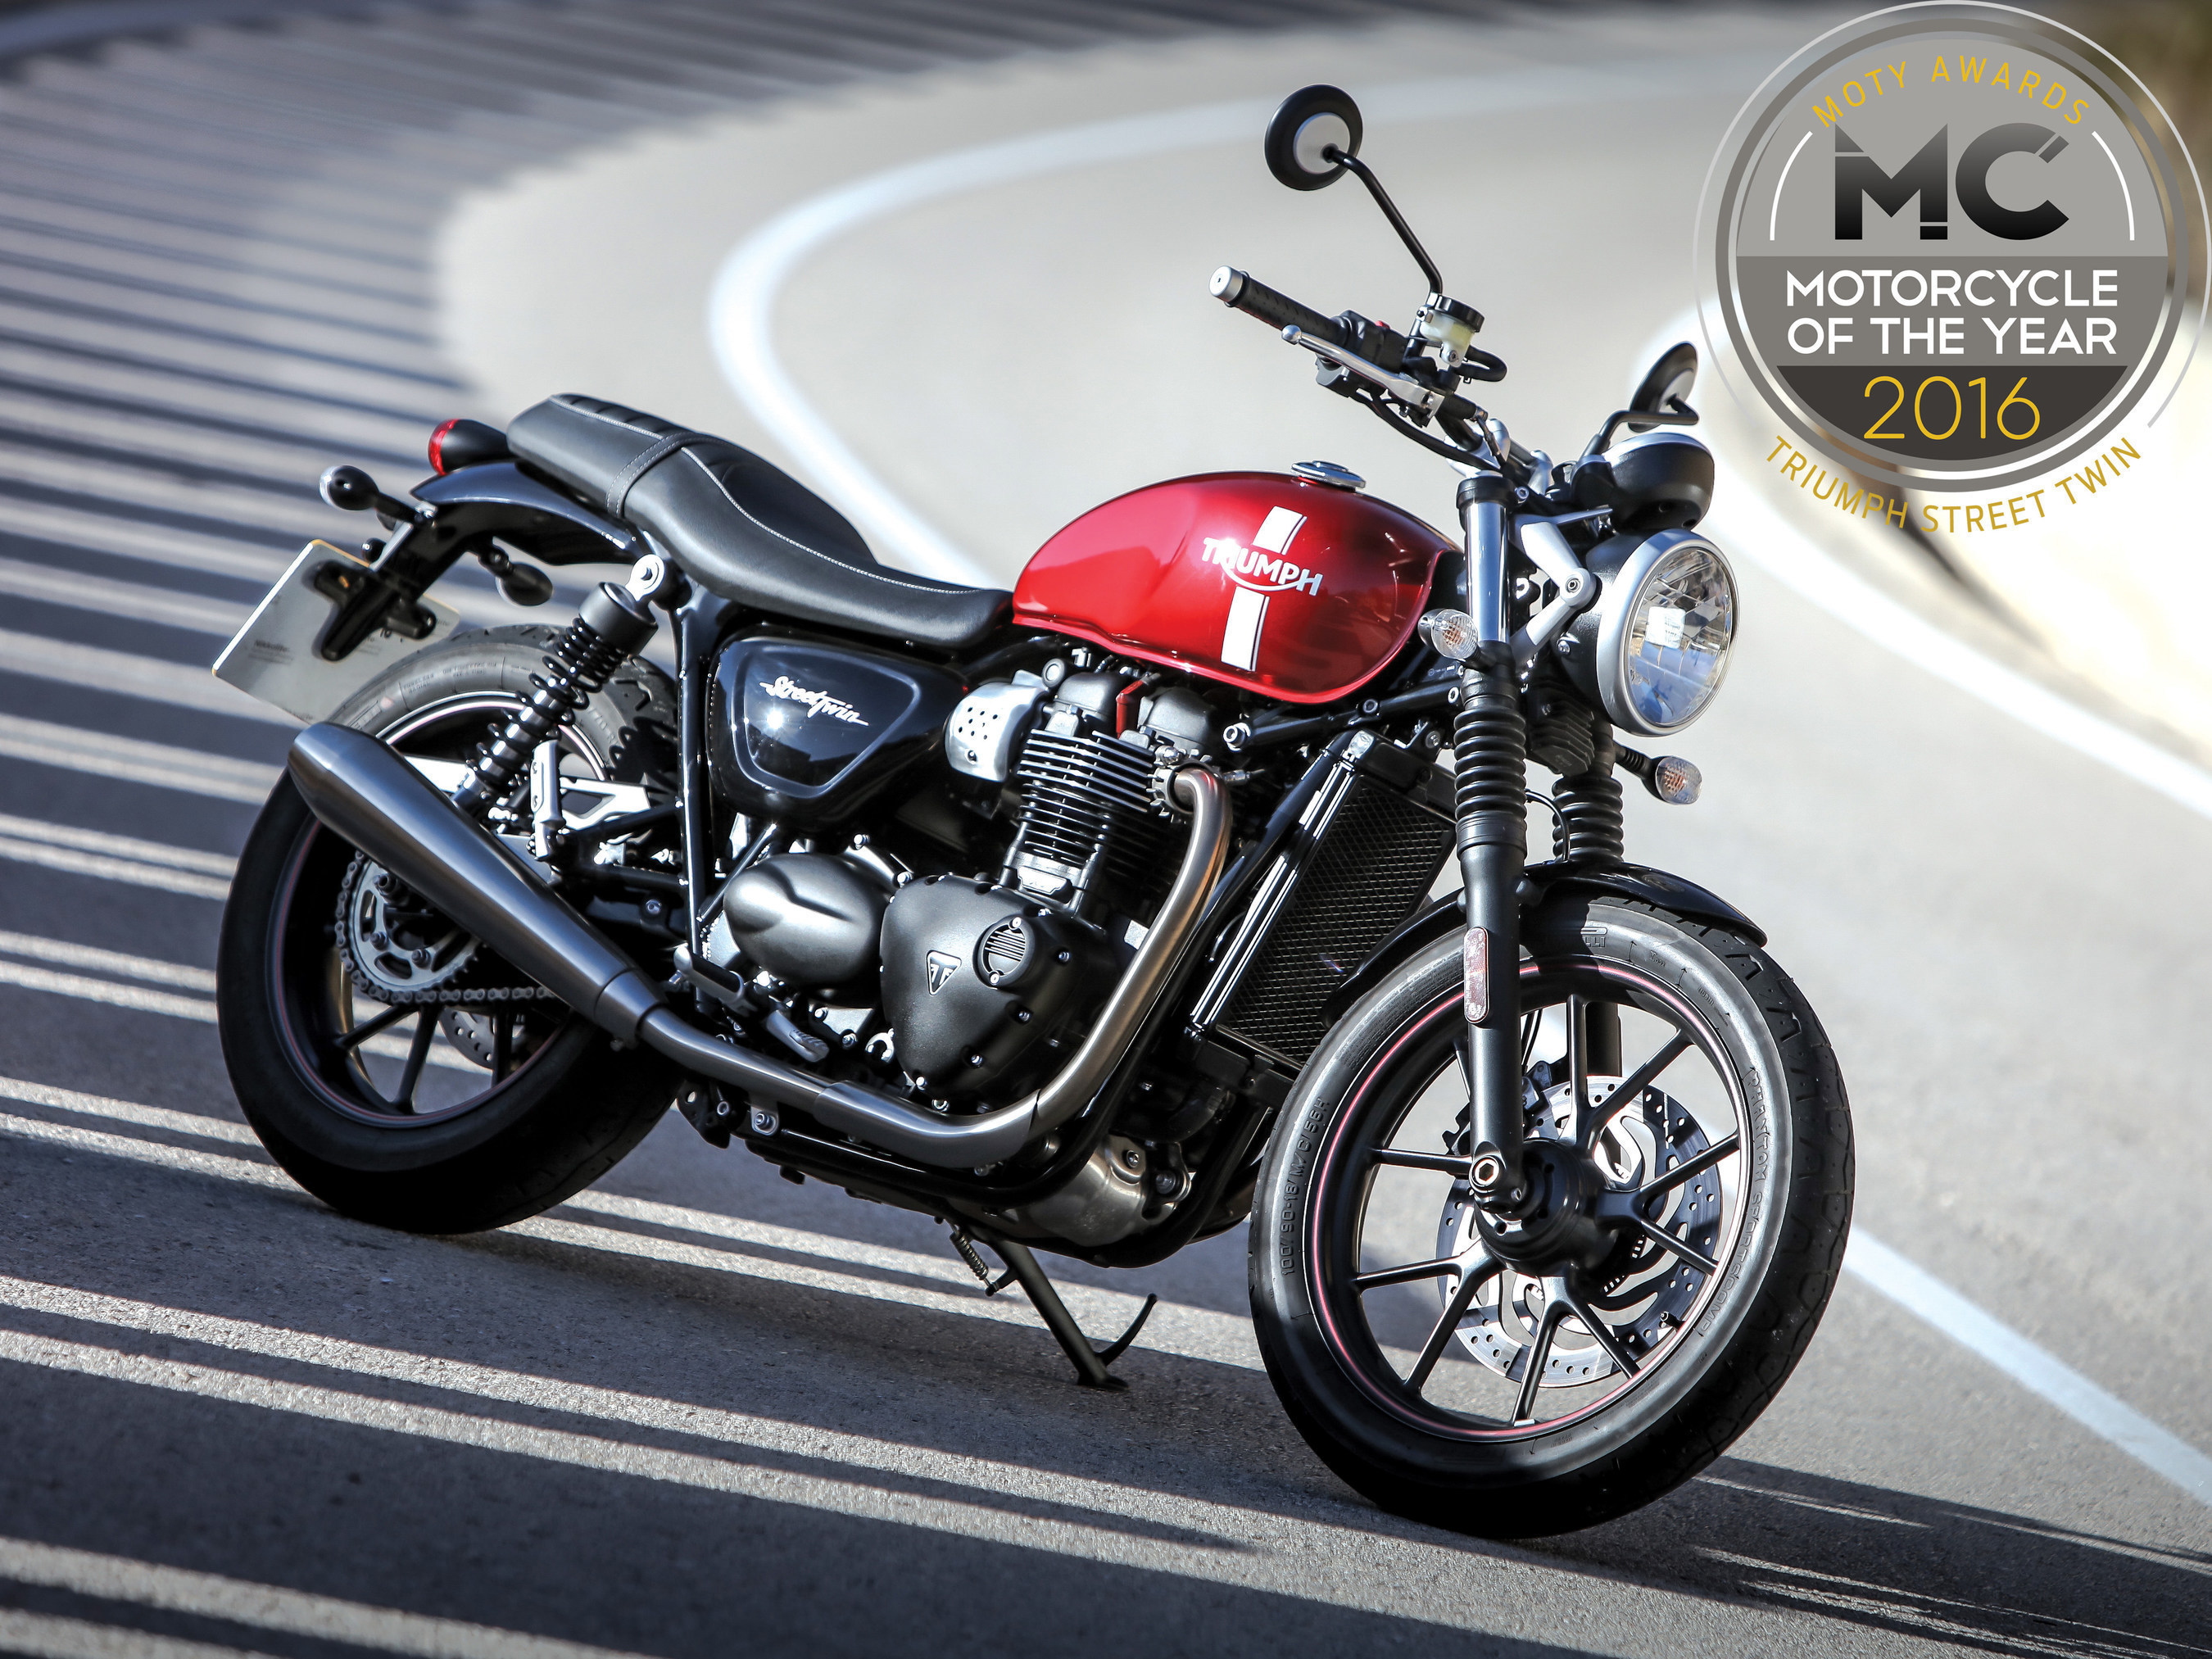 Motorcyclist Magazine Announces Triumph Street Twin As "Motorcycle of the Year"